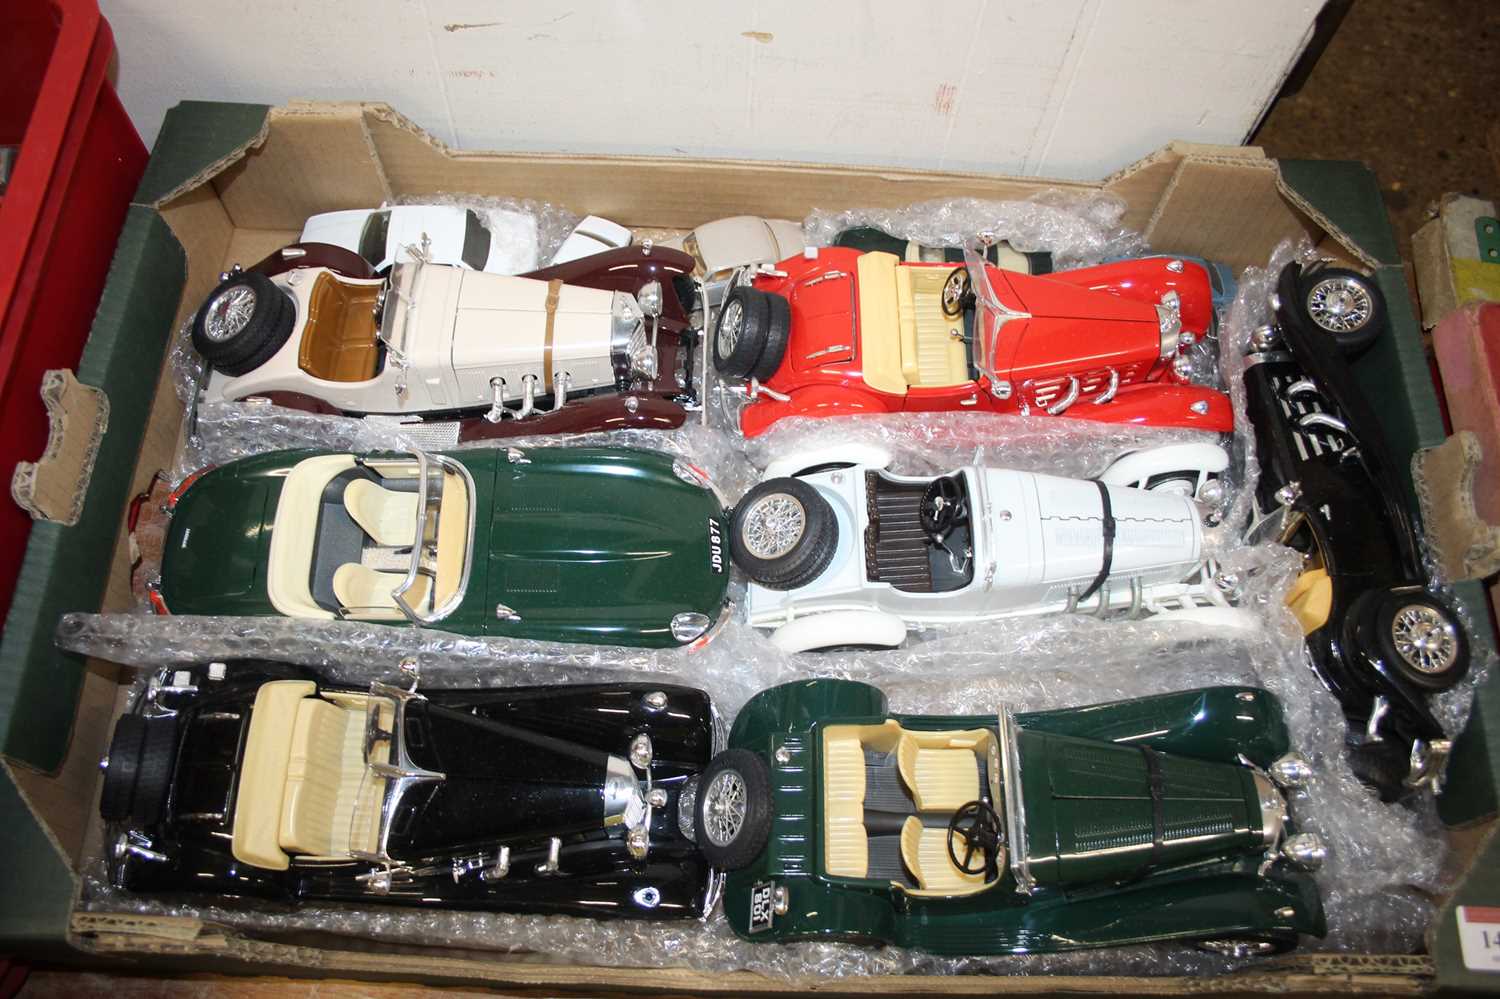 One tray of mixed loose diecast to include 1/18 scale and others, specific examples to include